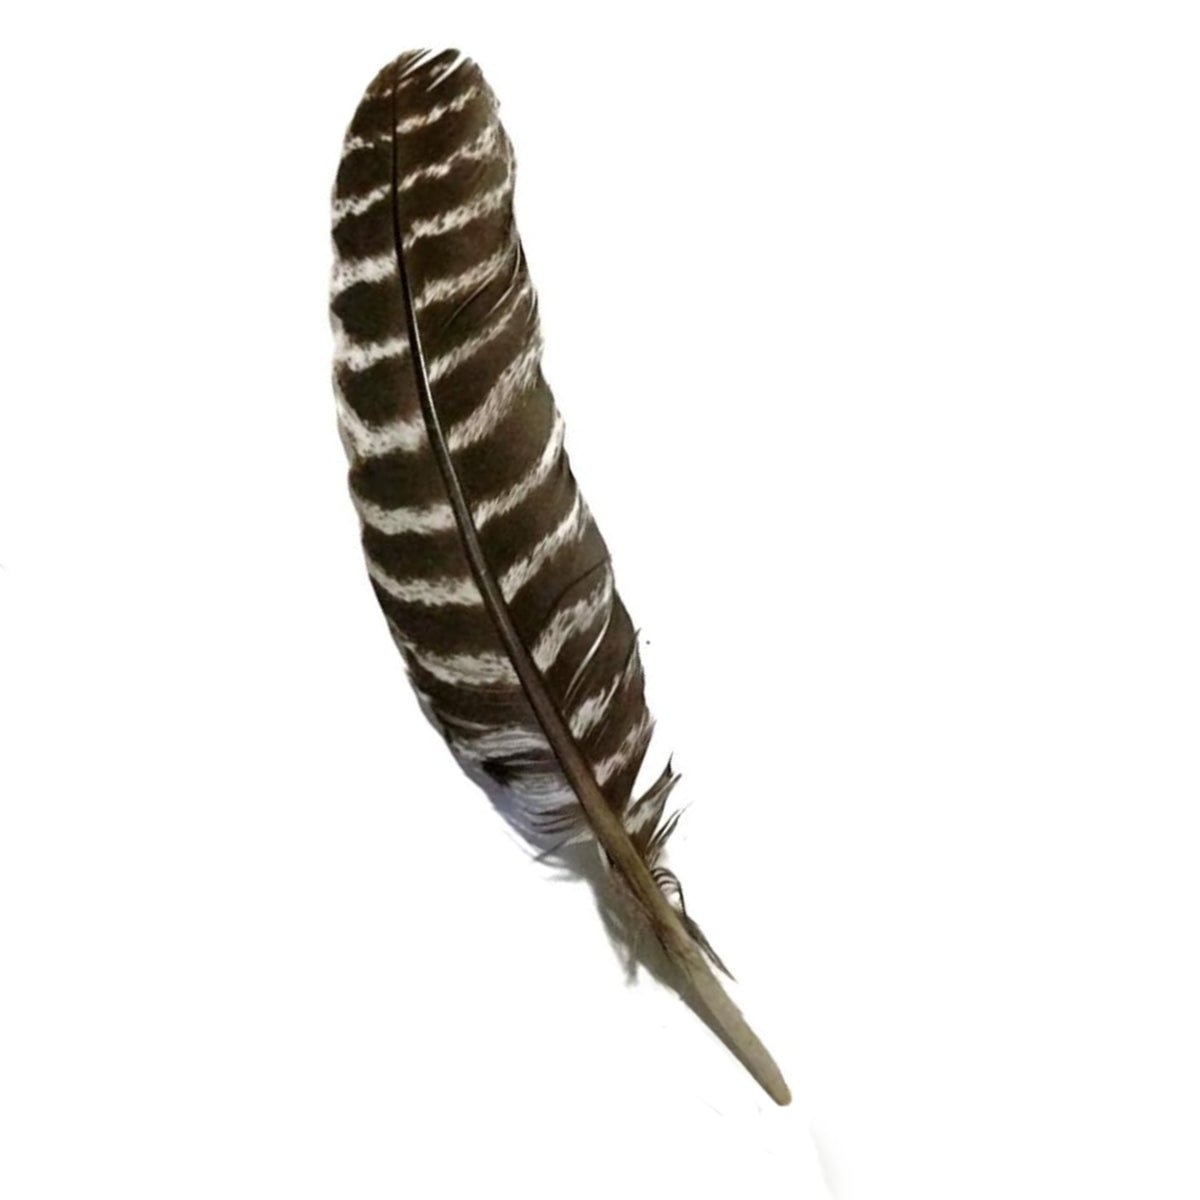 Barred Turkey Feather - 13 Moons